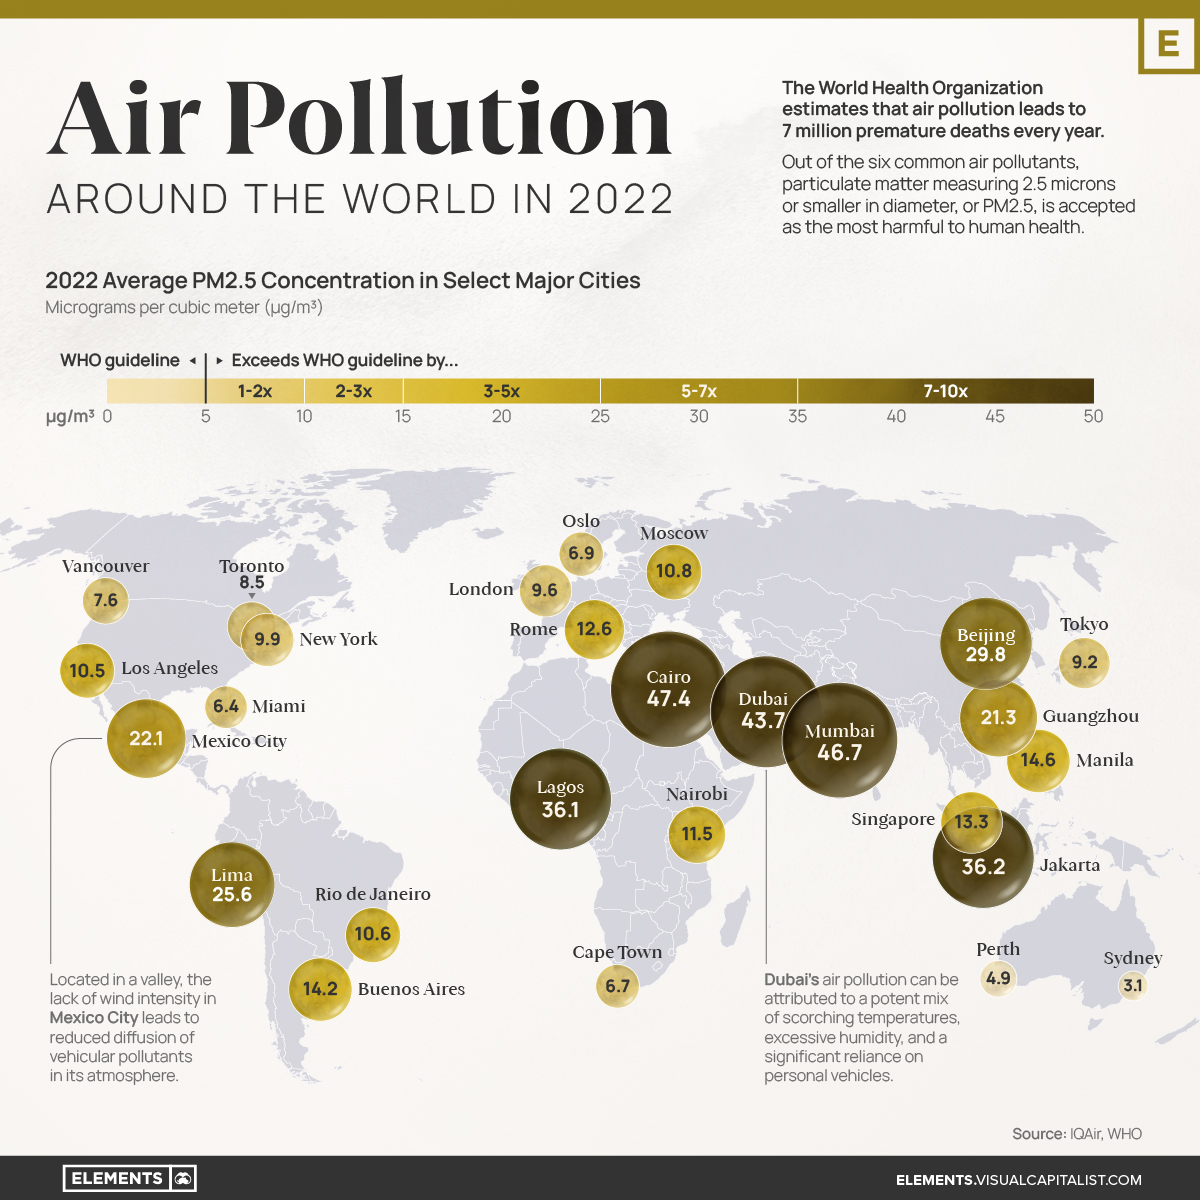 Exploring 2022 average air pollution levels around the world using PM2.5 concentrations in micrograms per cubic meter. 